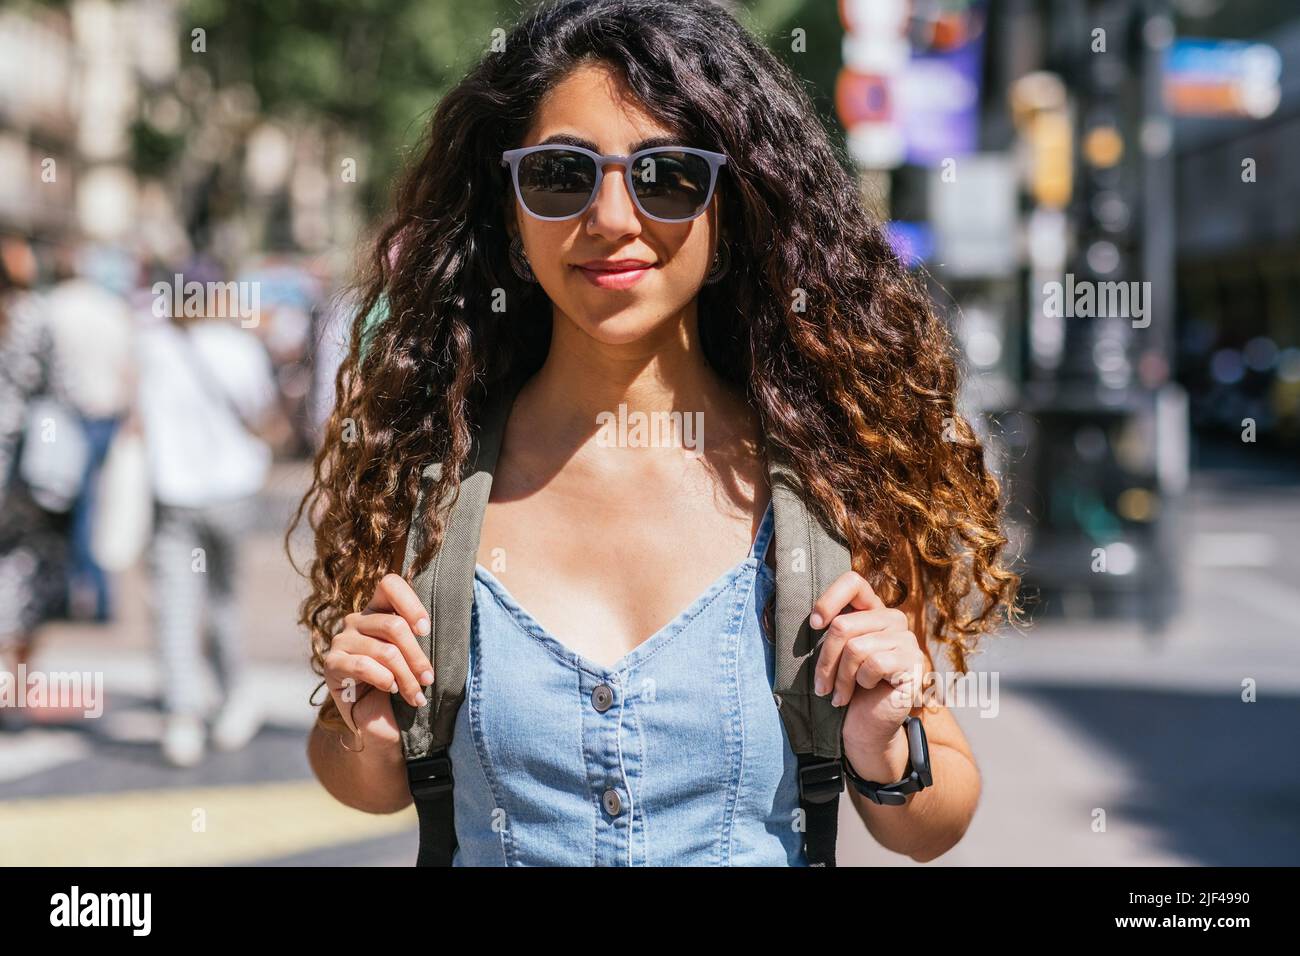 portrait of a beautiful dark haired young woman wearing denim dress. She wears sunglasses and a backpack and looks to camera positively Stock Photo